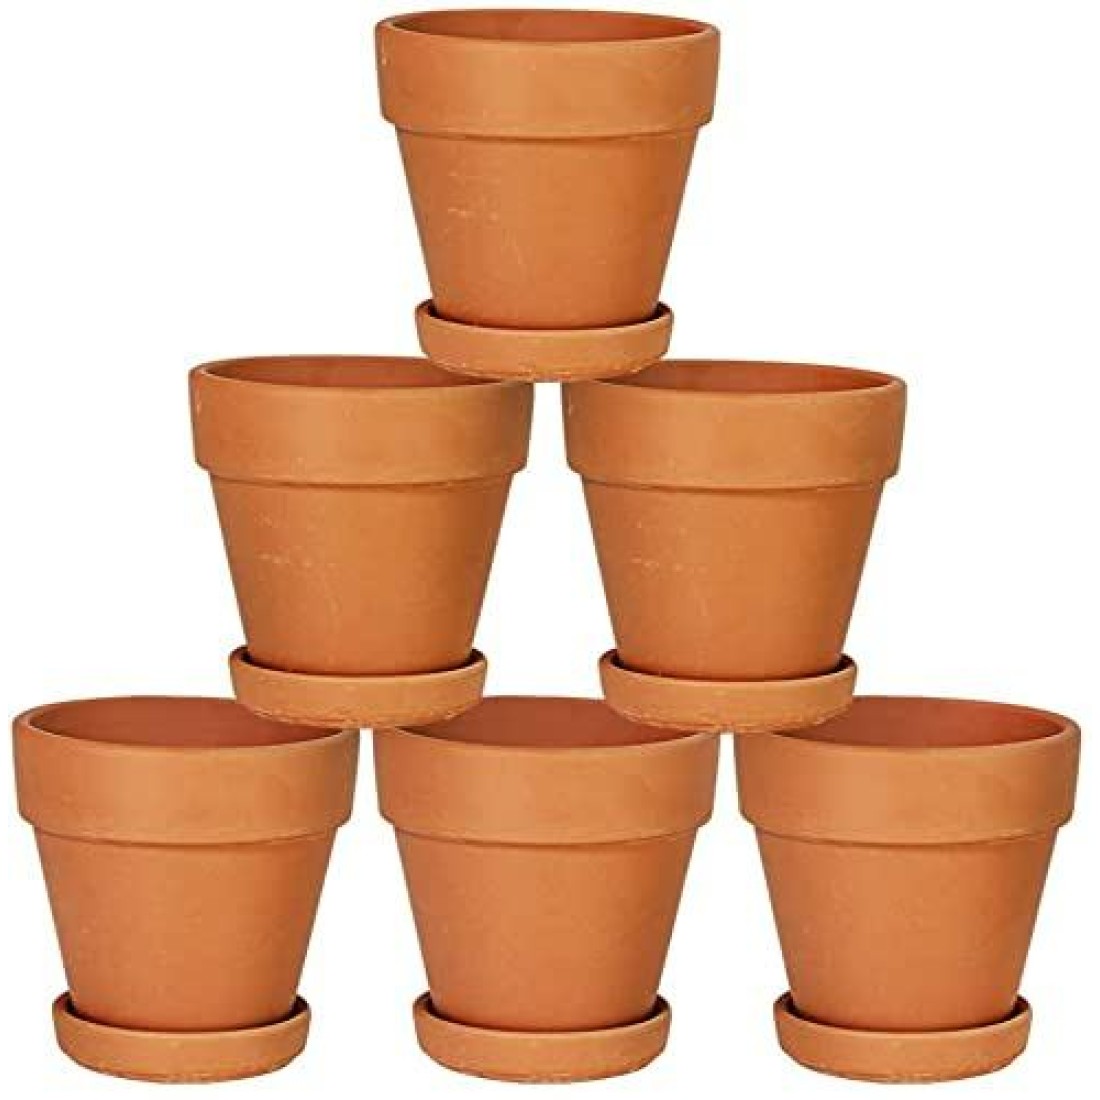 Terra Cotta Pots with Saucer- 4” inch Clay Ceramic Pottery Planter Cactus Flower Pots Succulent Pot Drainage Hole for Cacti,Succulent, Indoor Plant & Crafts (4 inches) (6) 1